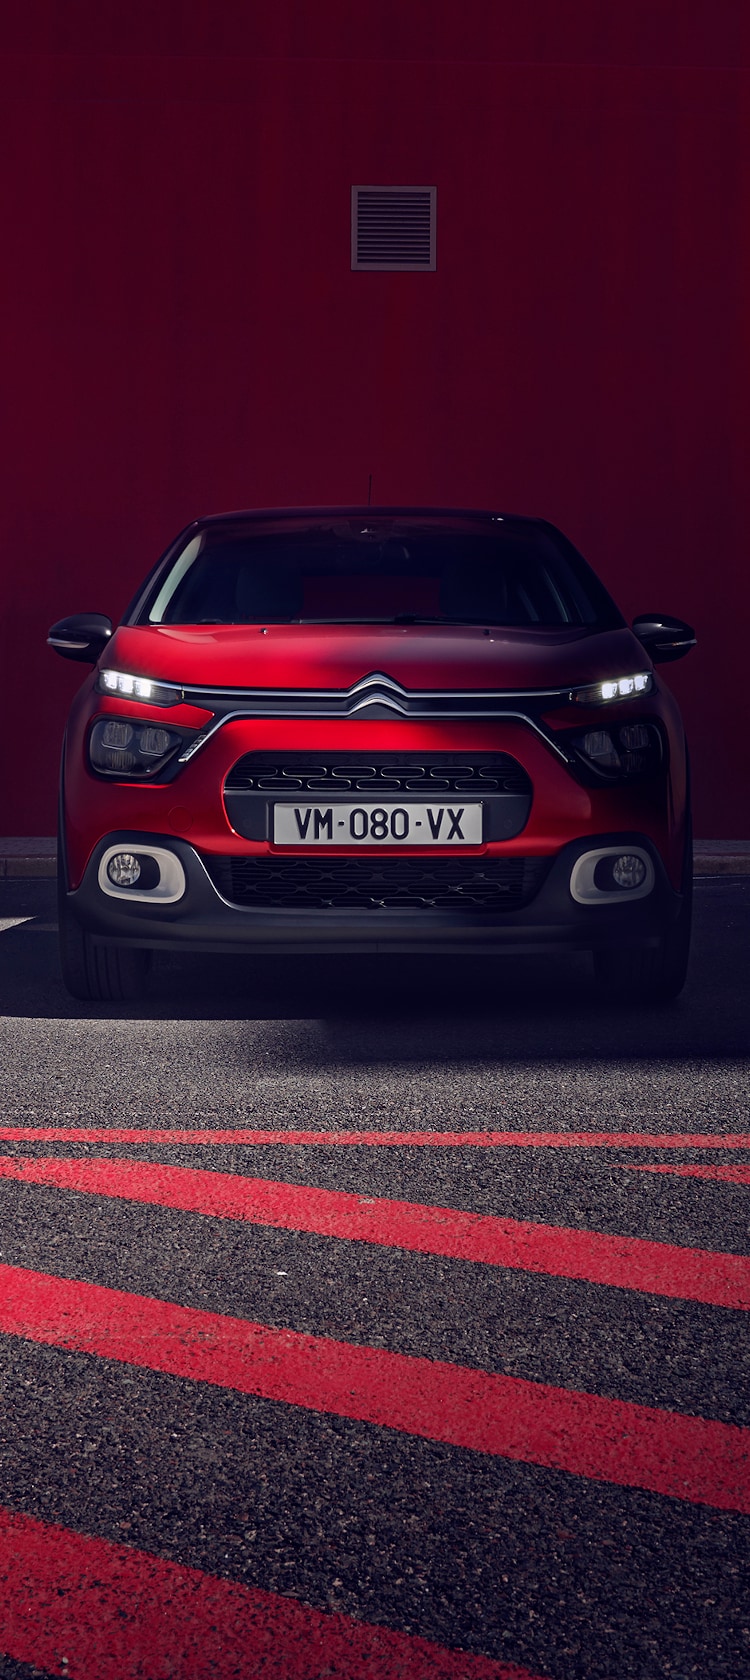 Citroën New Vehicle & Extended Warranty For Business